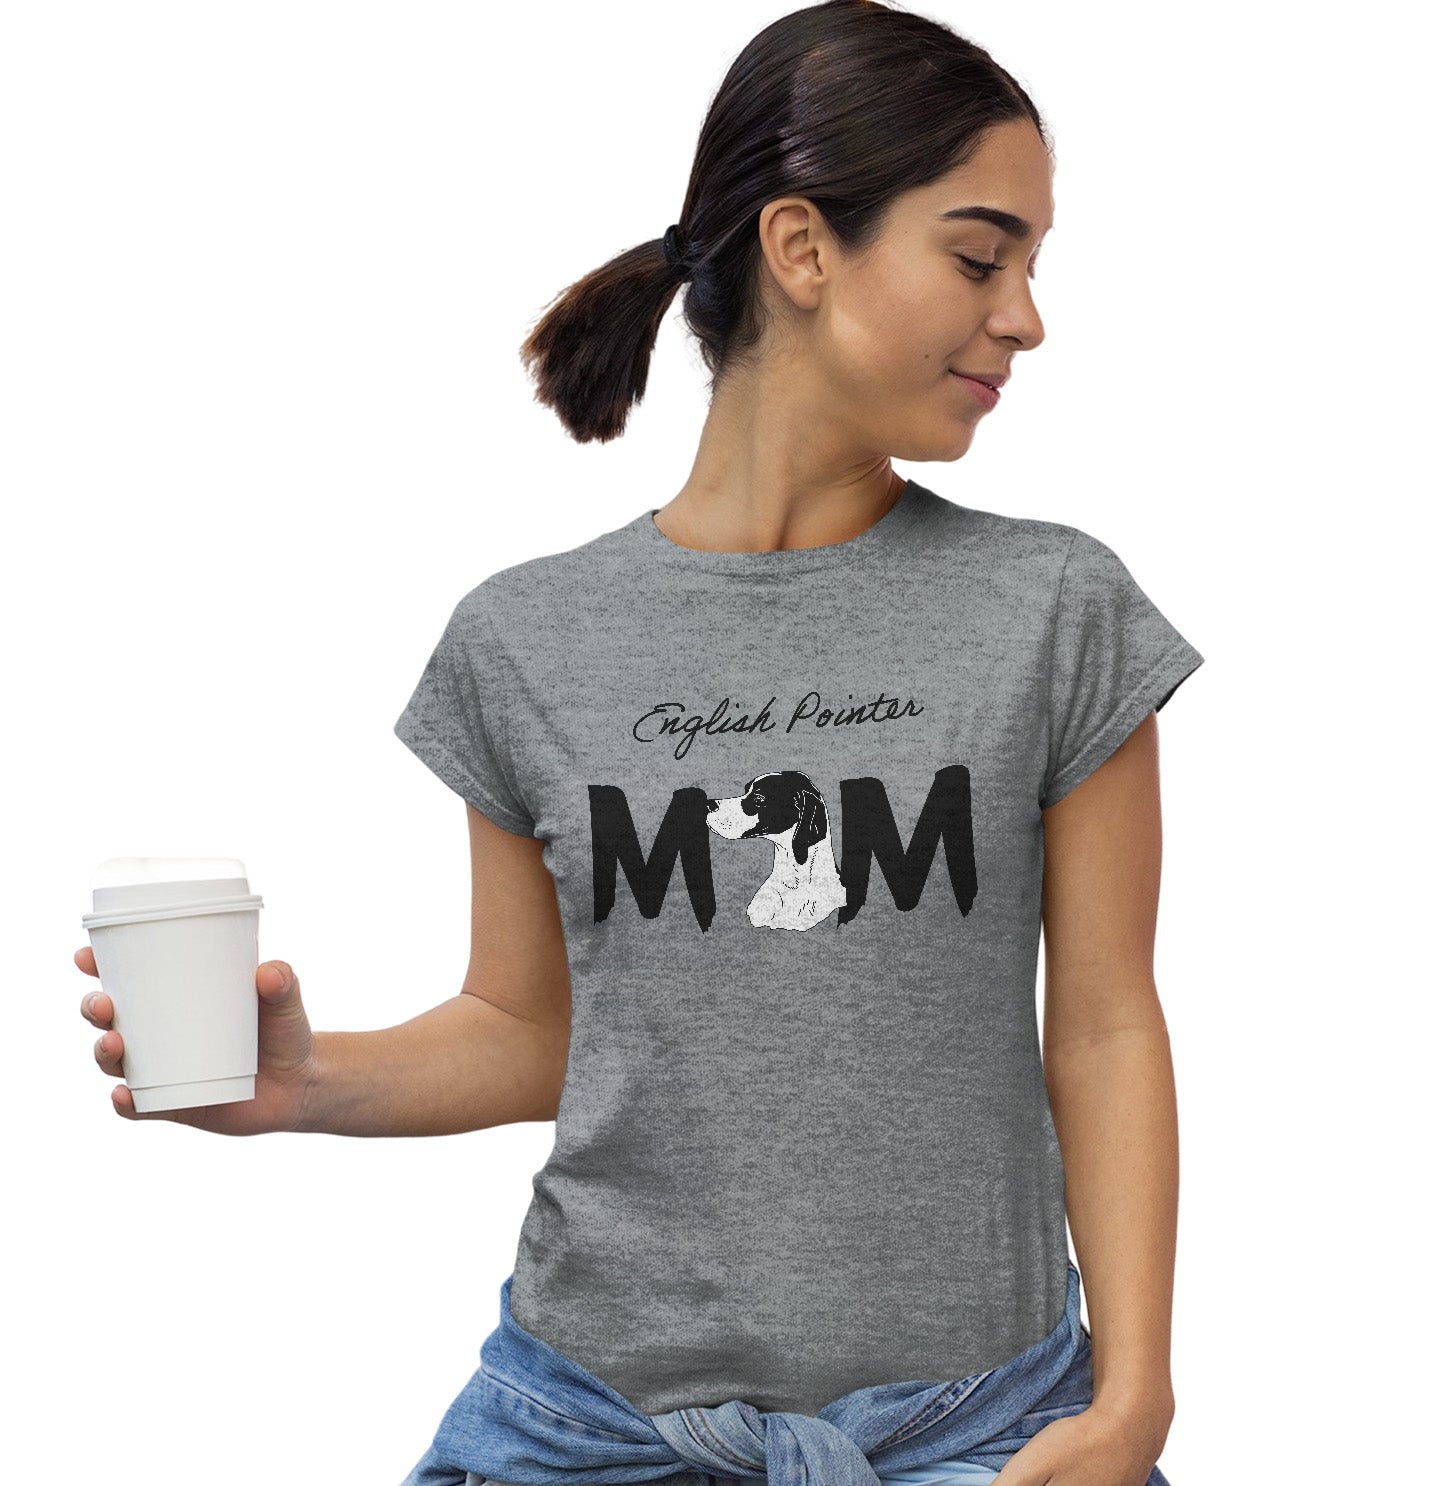 English Pointer Breed Mom - Women's Fitted T-Shirt